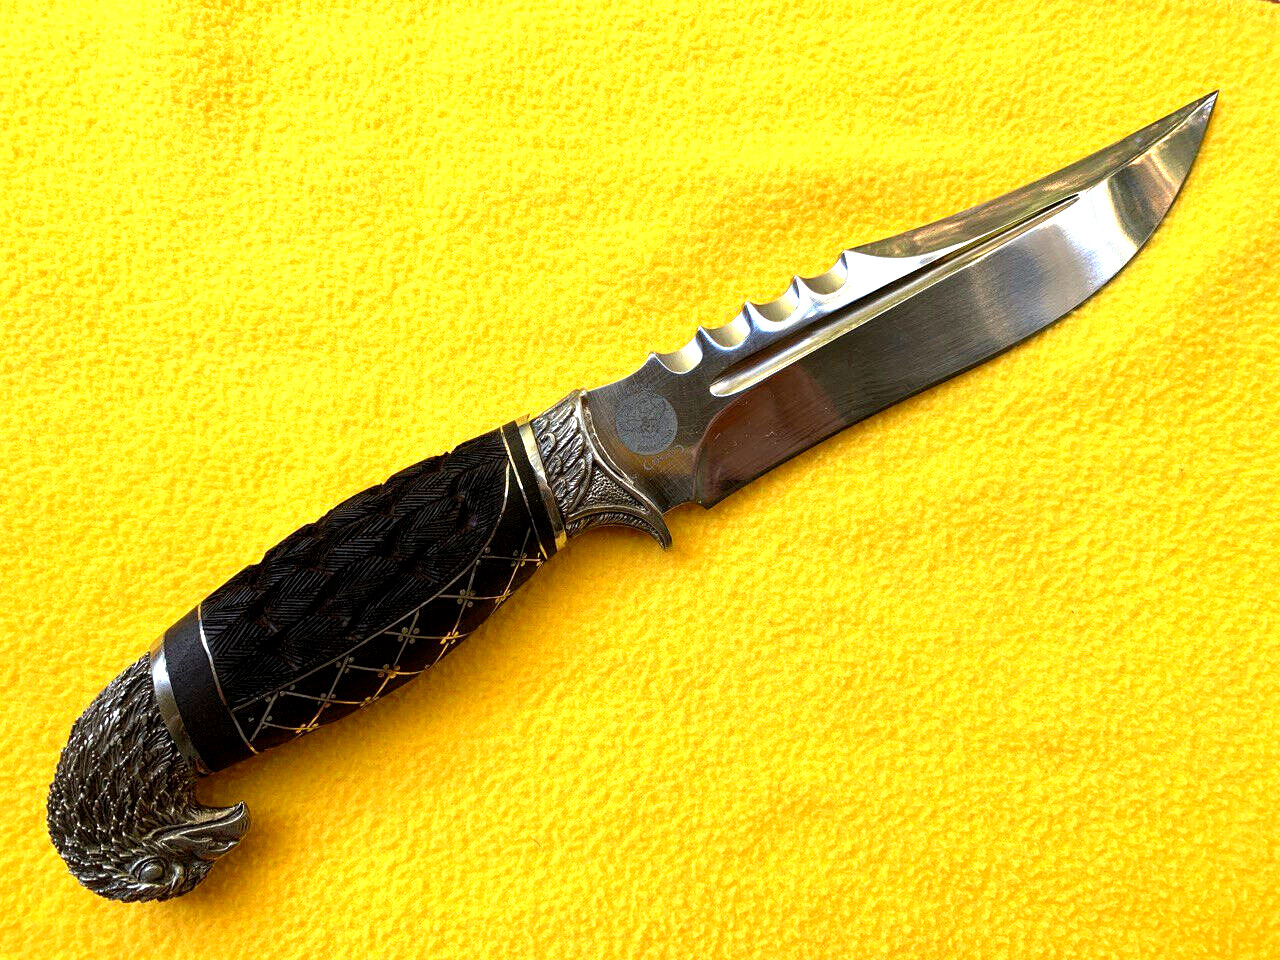 RANDALL MADE KNIVES - in DAGESTAN Bowie Knife Style, Hunting Khabib Eagle Mettle